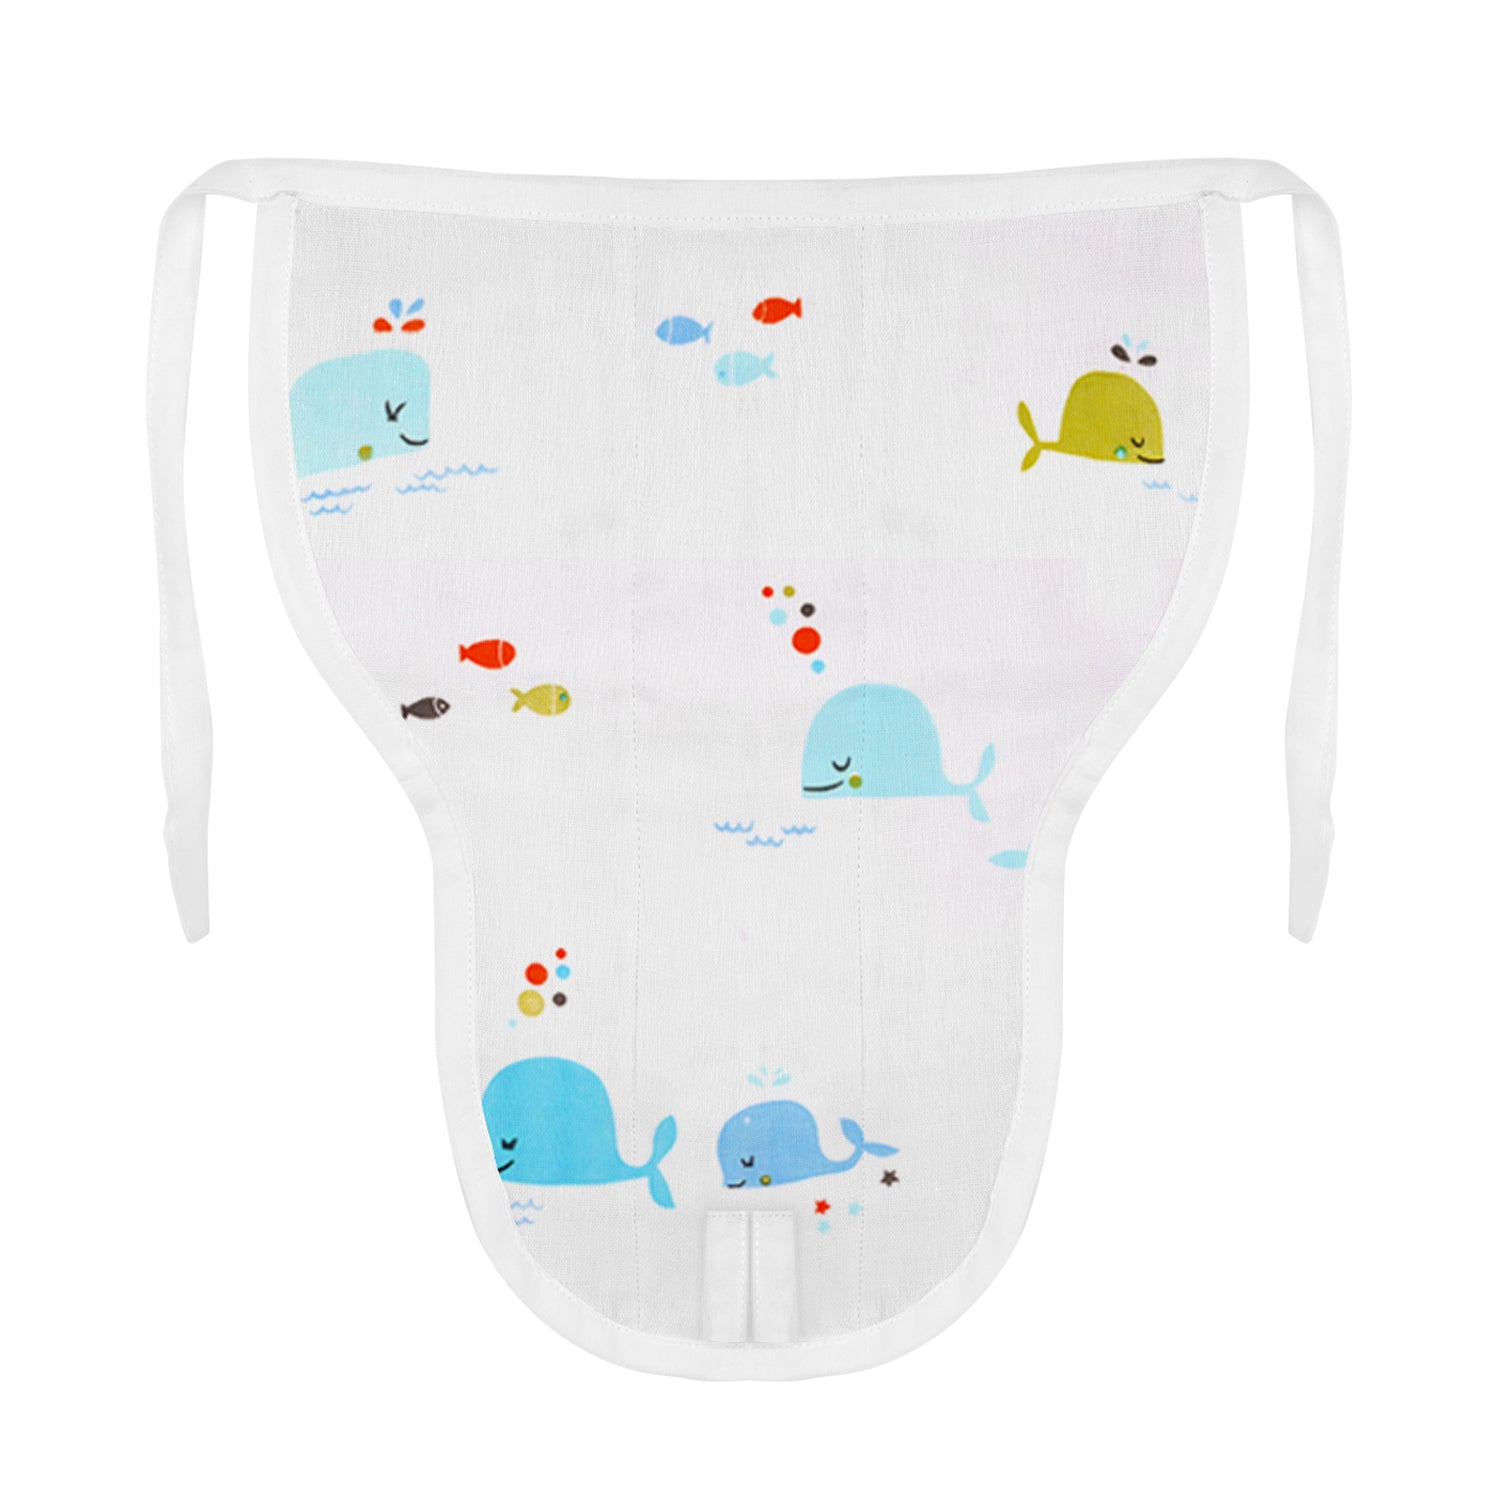 Baby Unisex Organic Cotton Muslin Jhabla and Nappy Set-Pack of 3